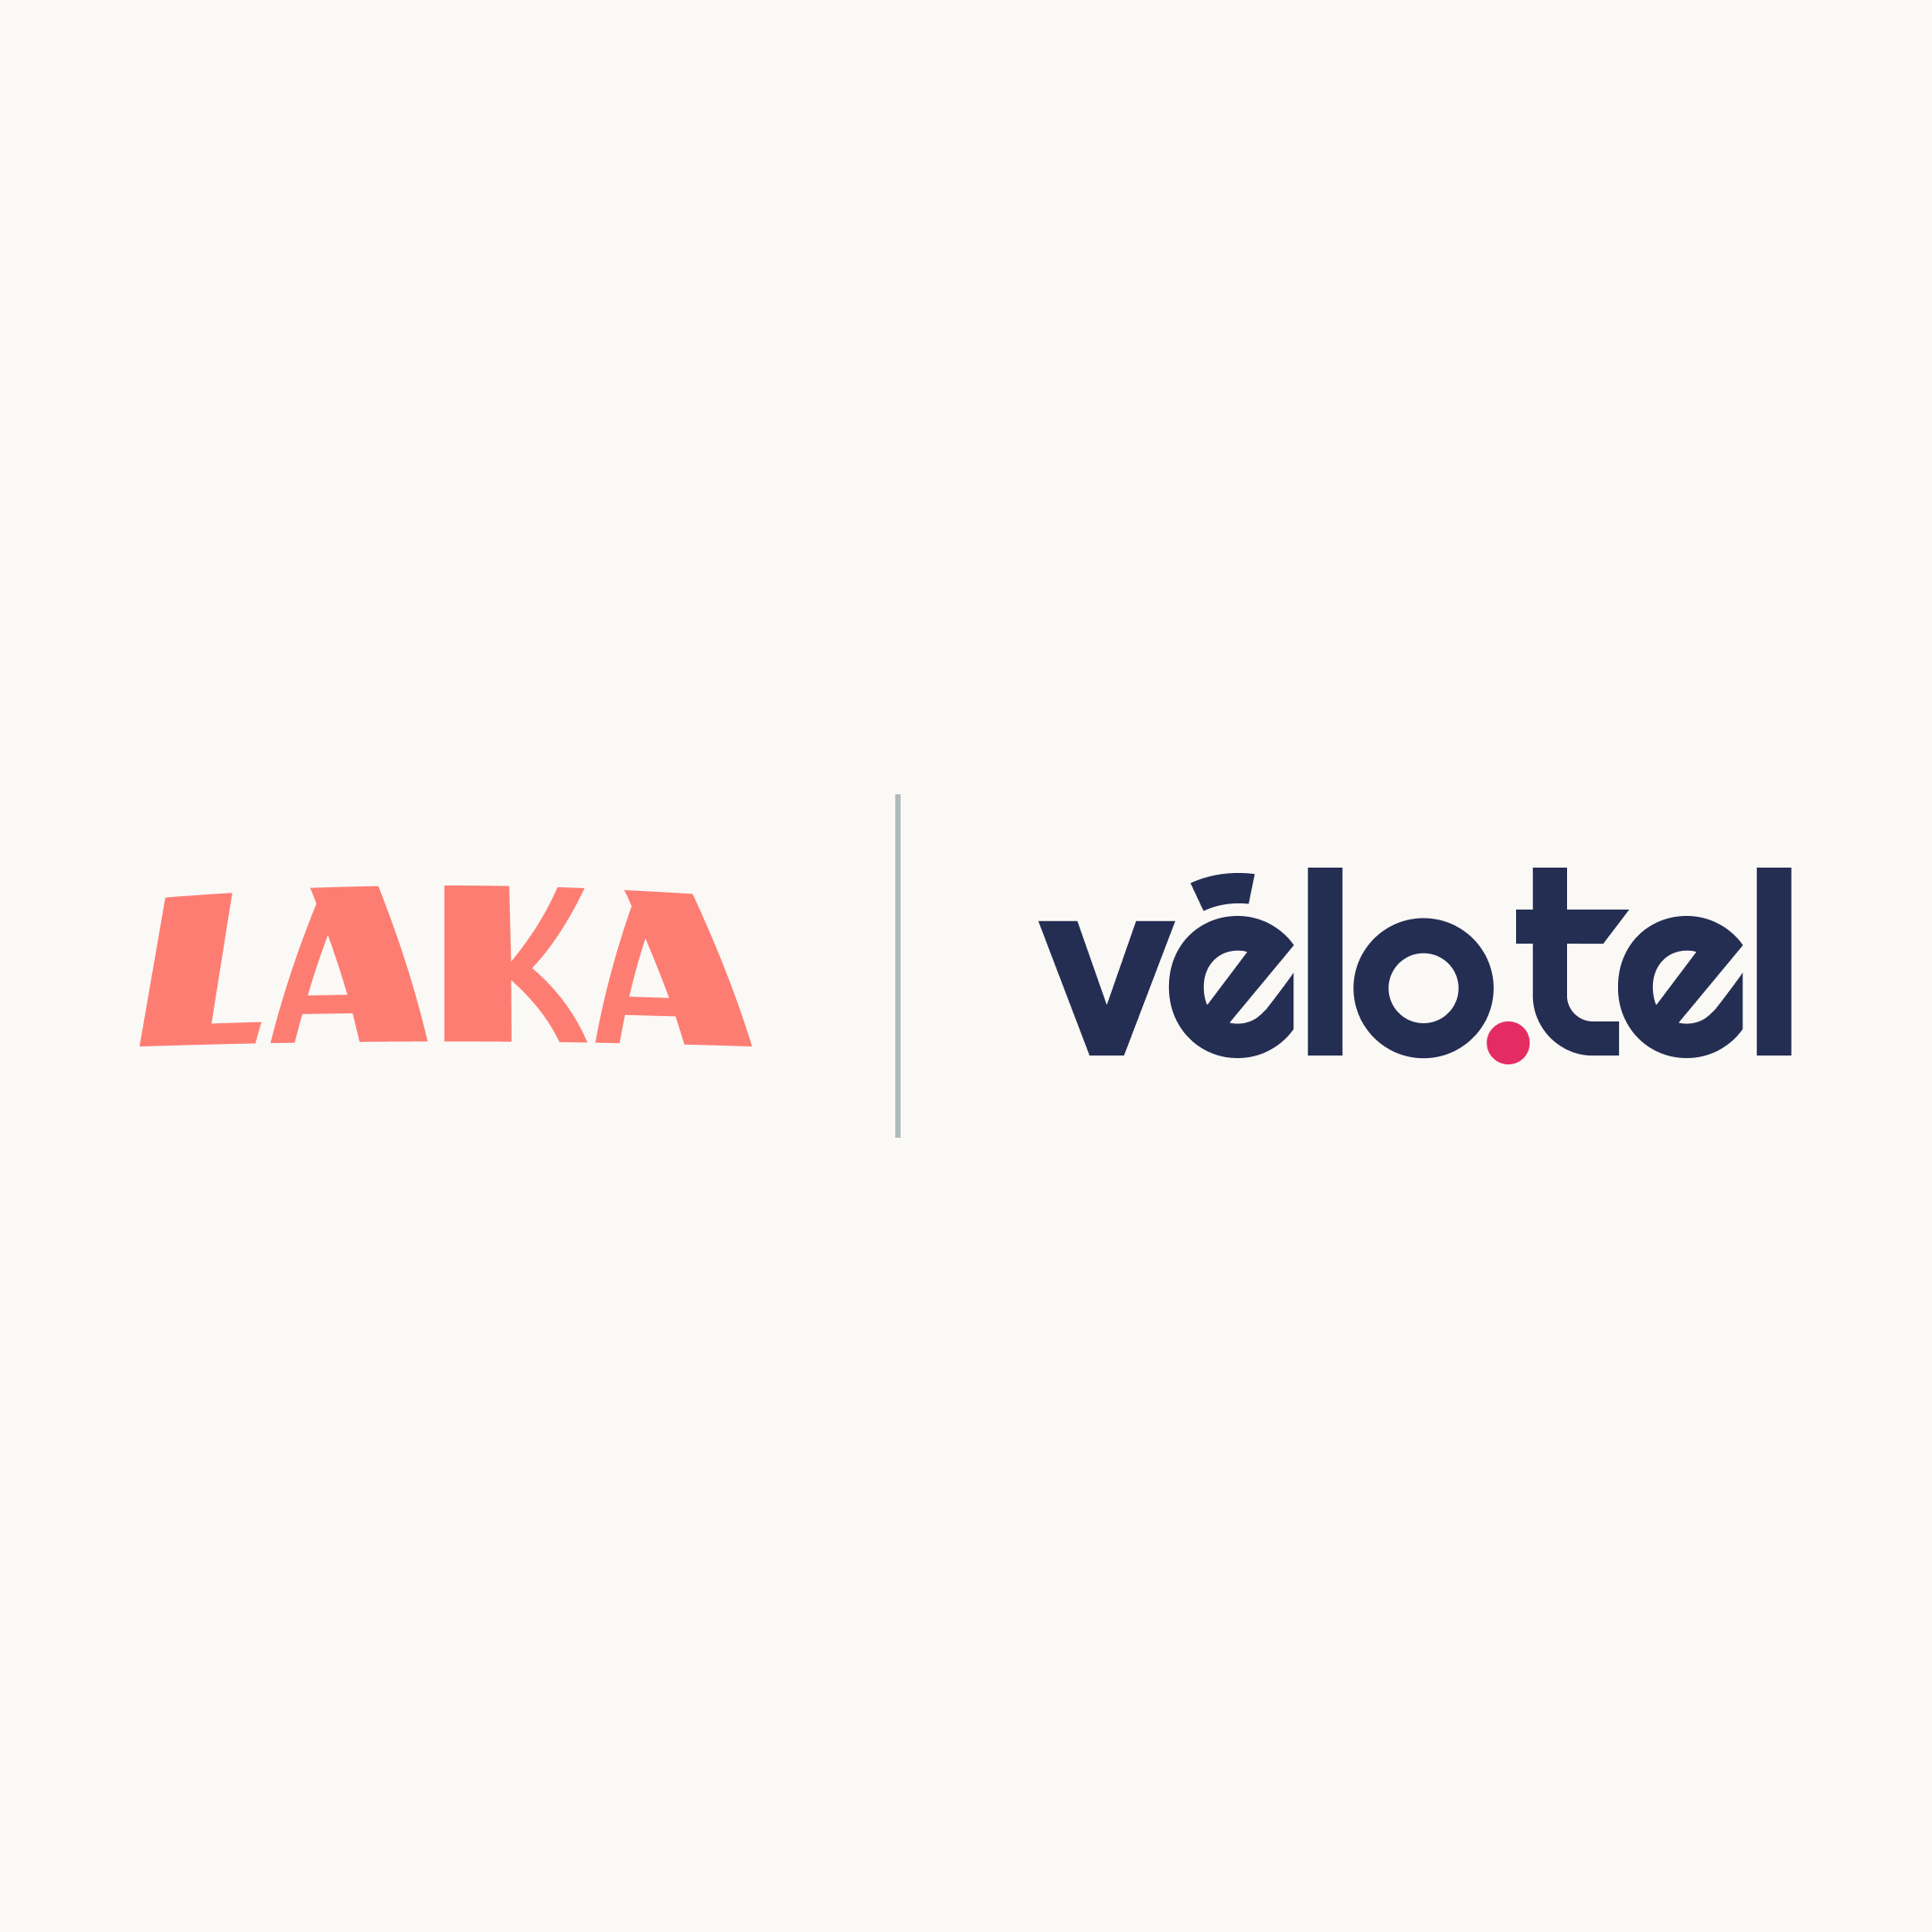 We've Partnered With Velotel - The Mobile Network For Cyclists 🎉